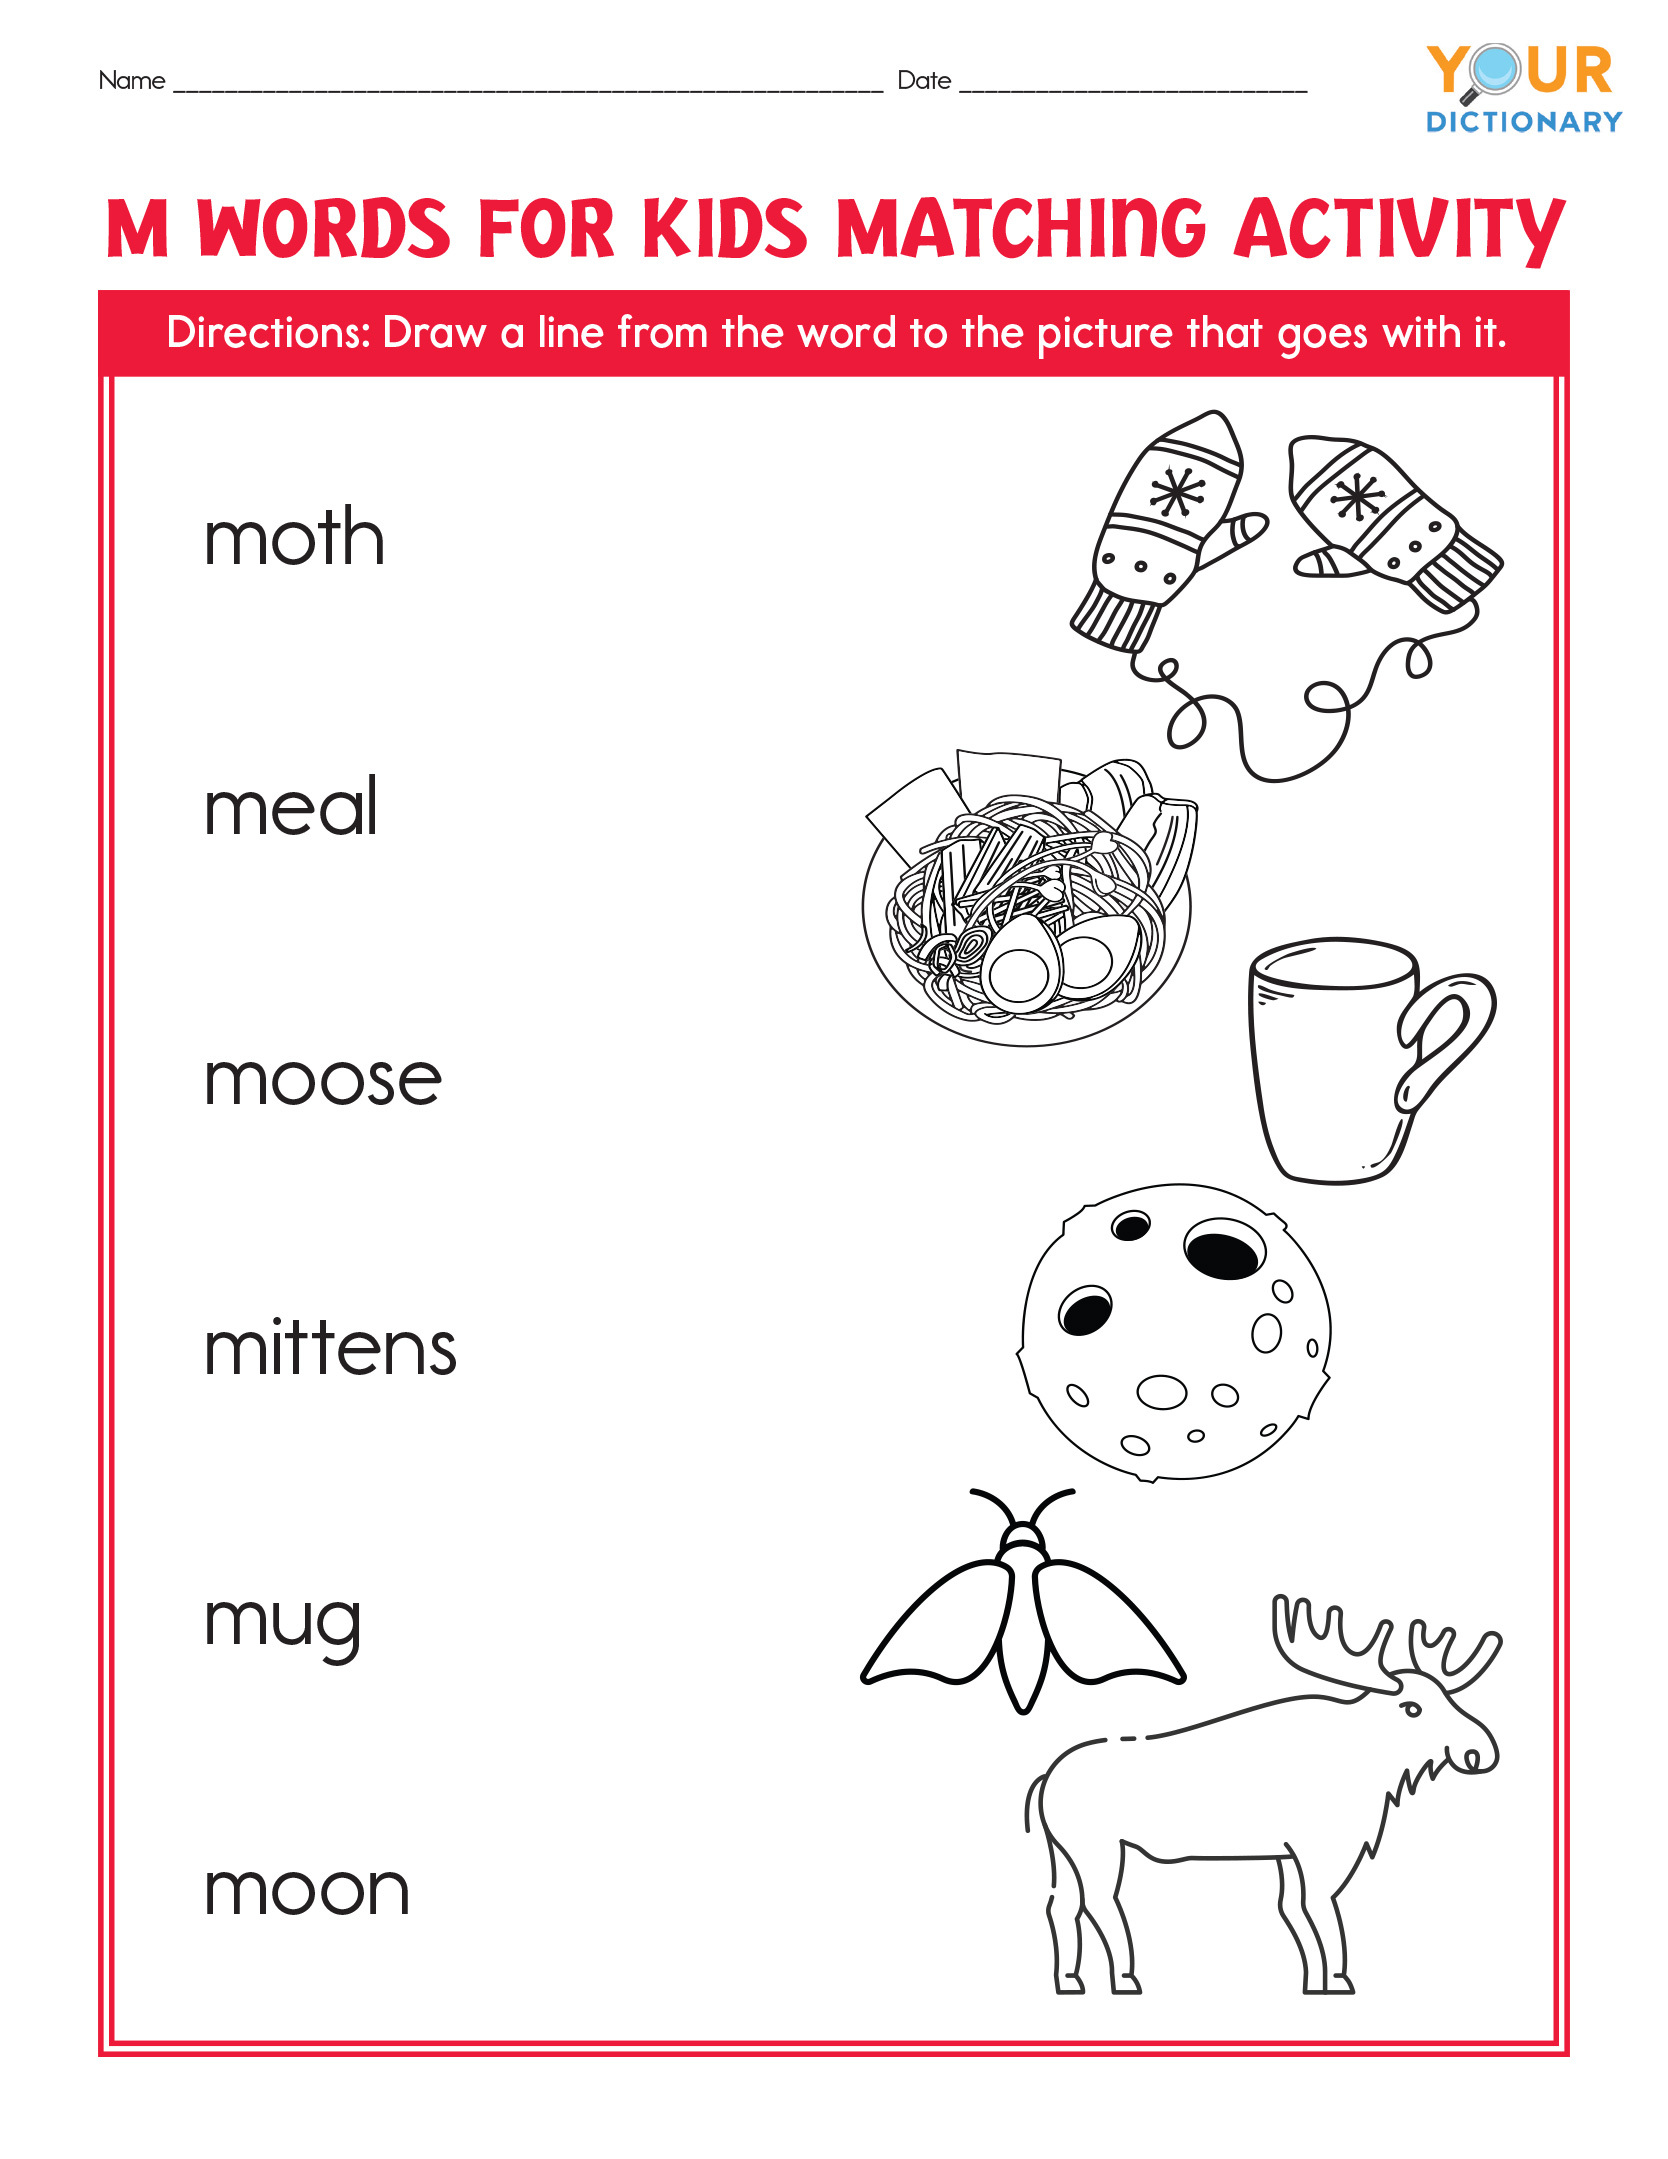 m words for kids matching activity